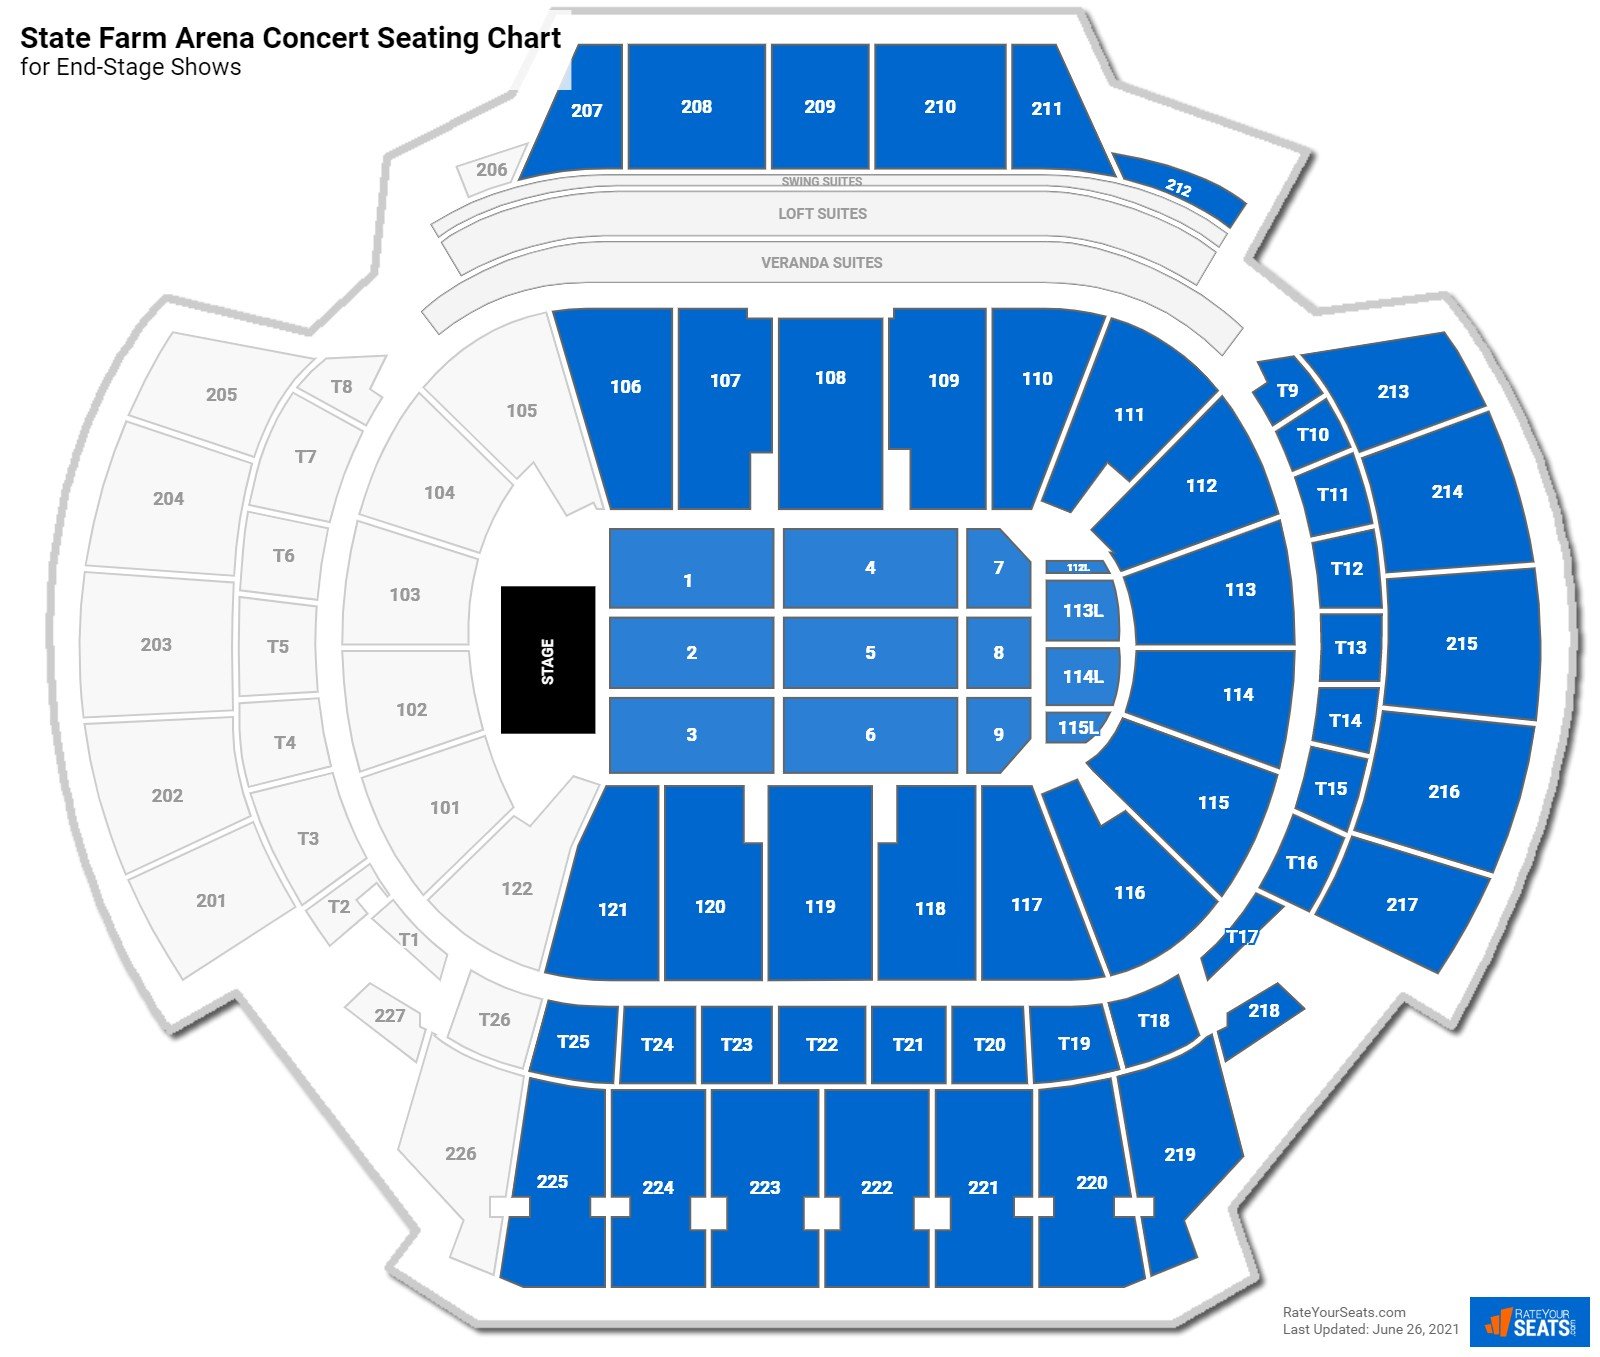 State Farm Arena Concert Seating Chart RateYourSeats com